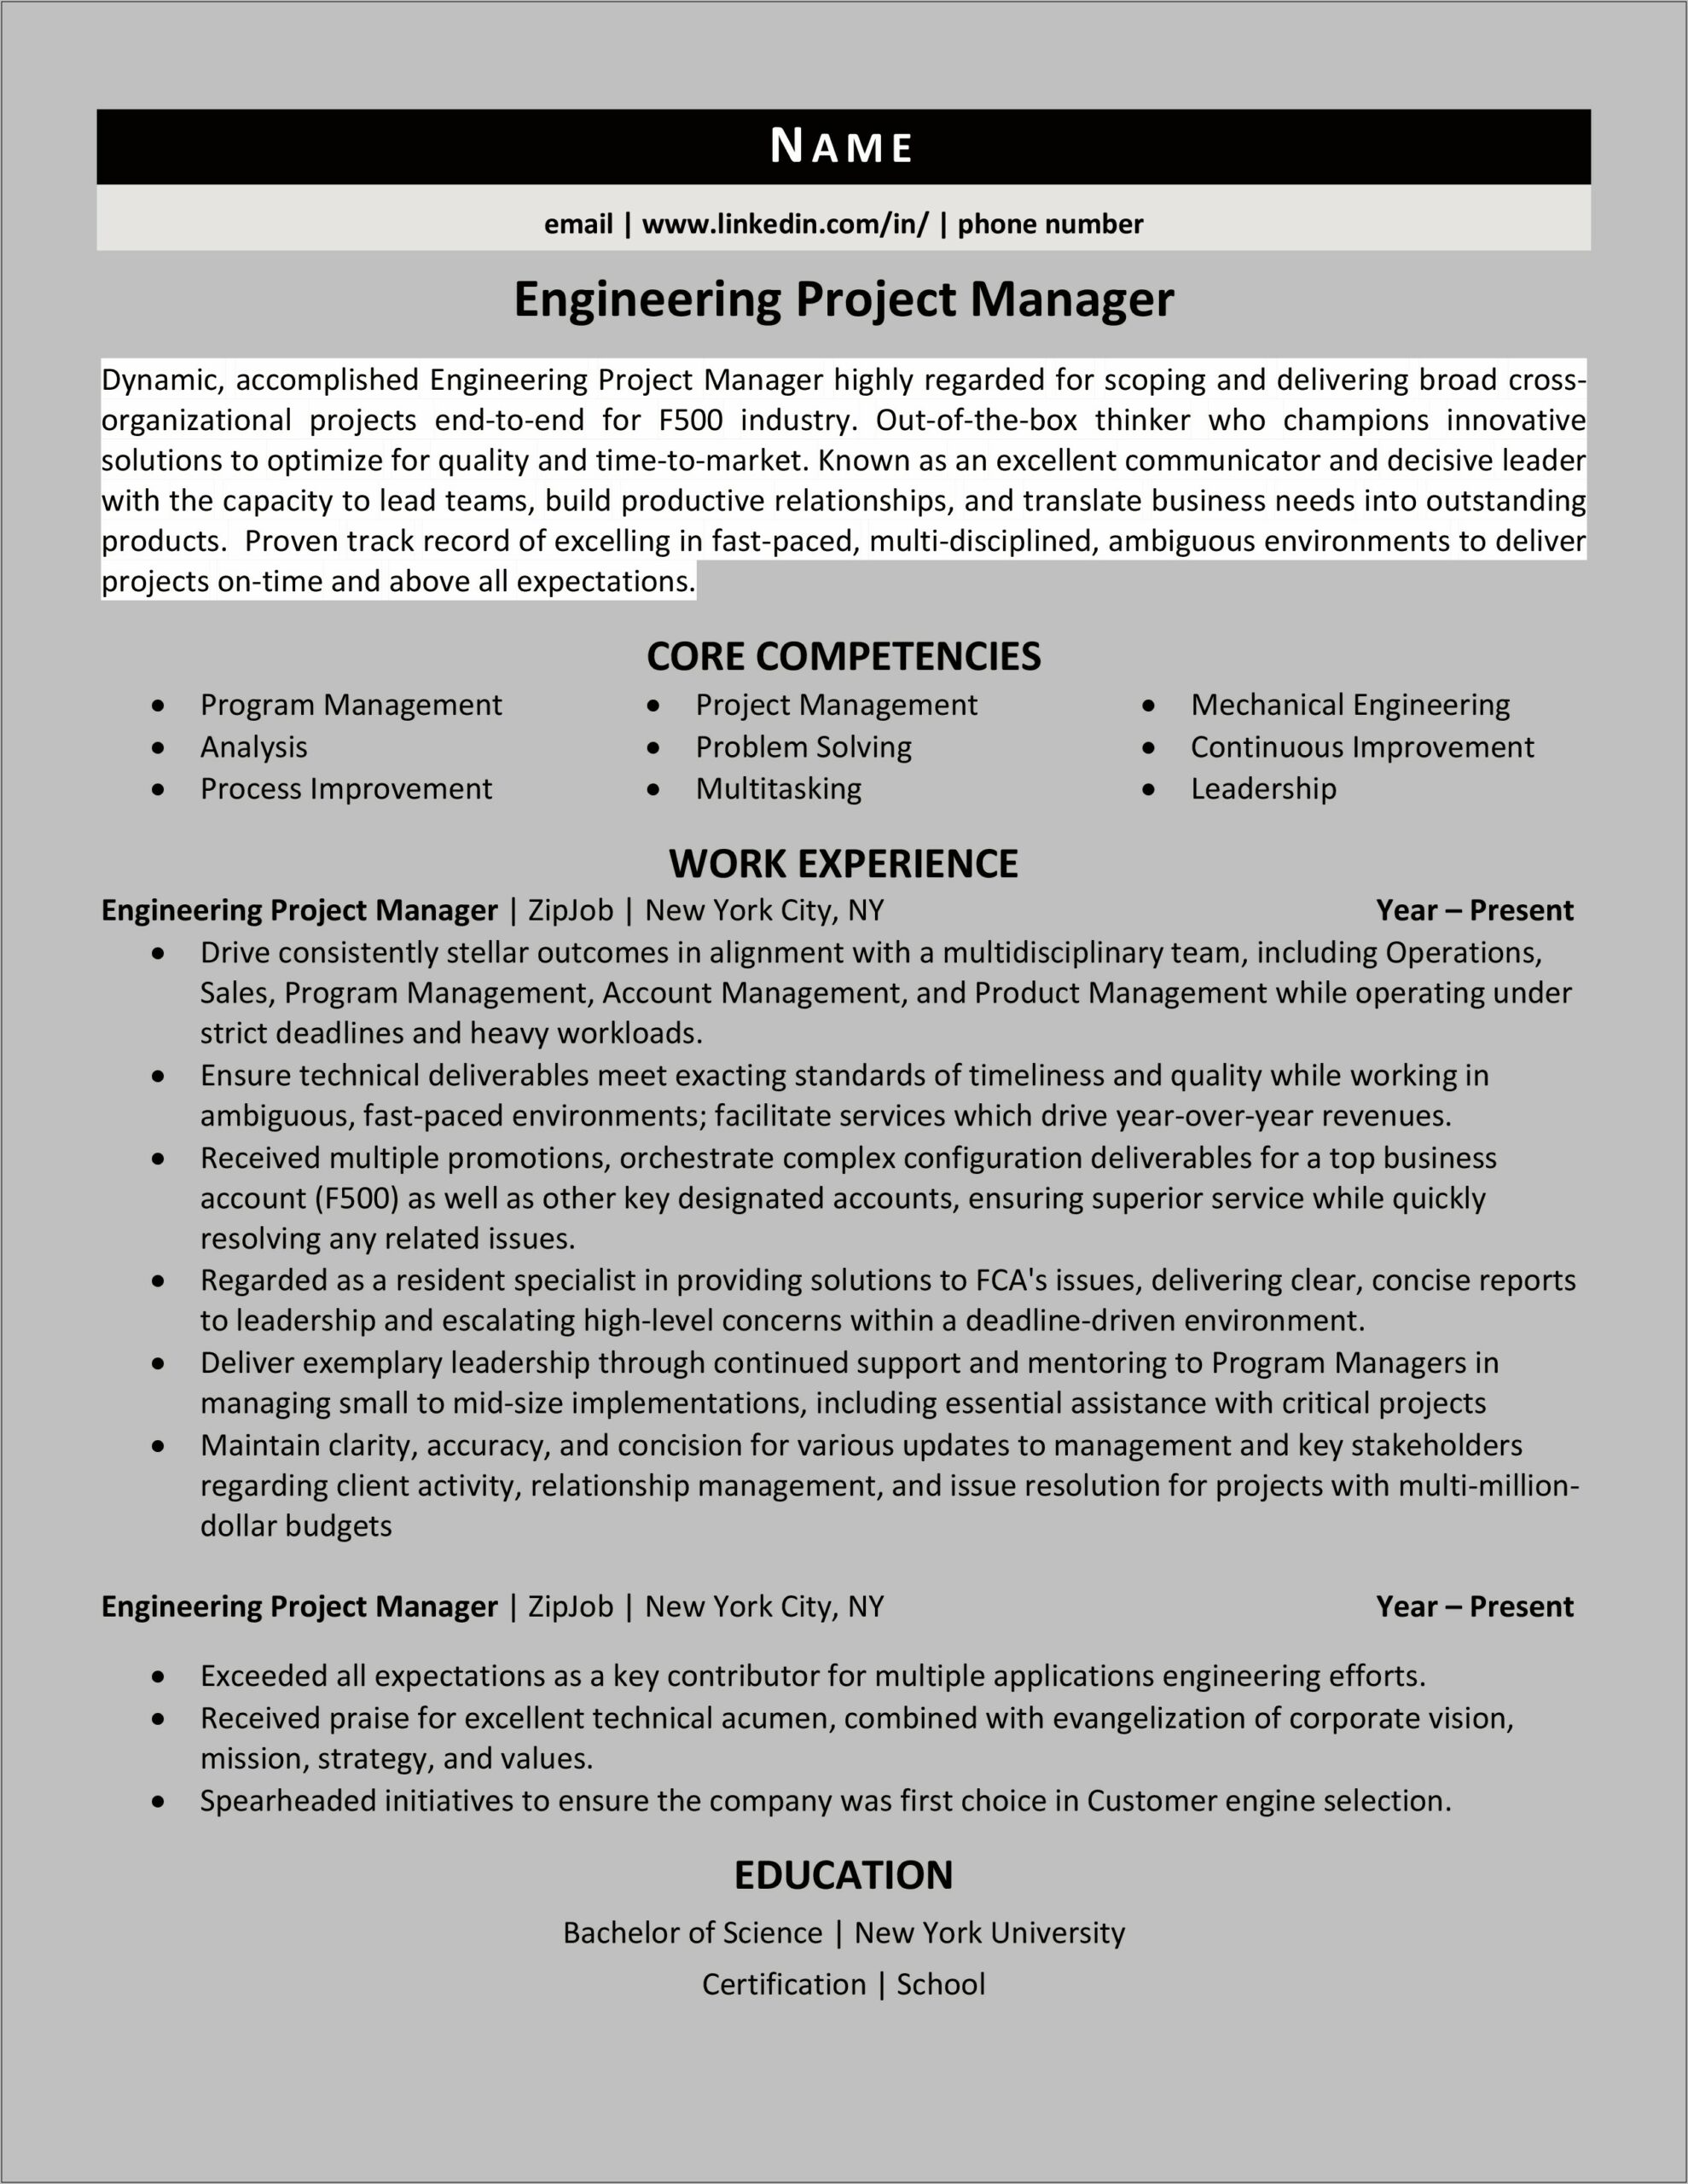 Process Improvement Project Manager Resume